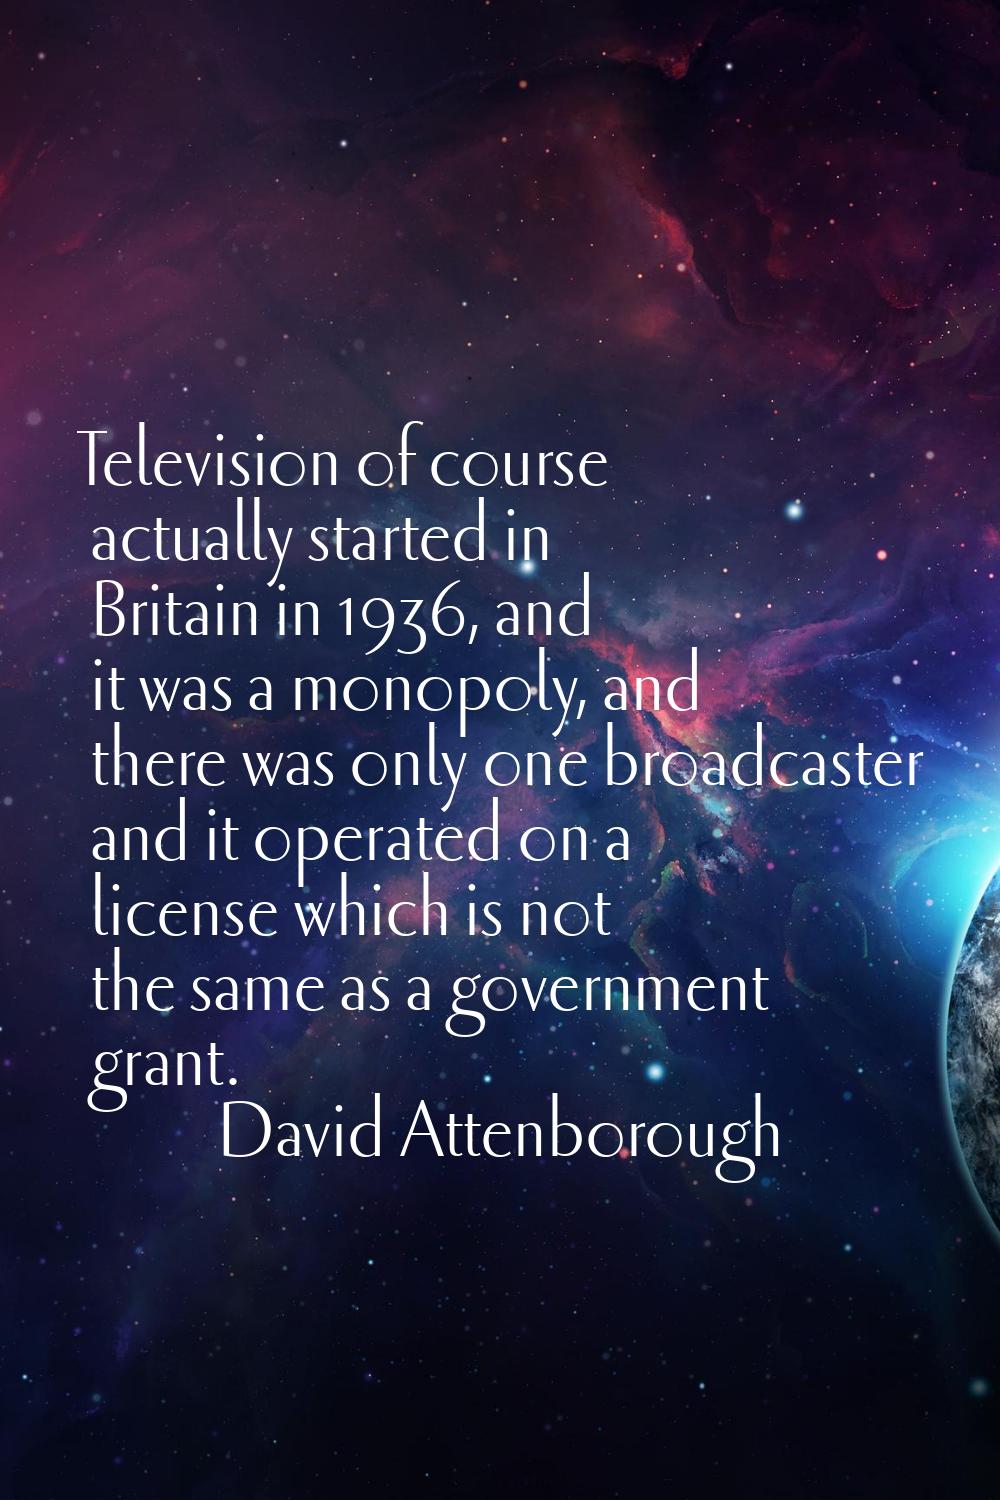 Television of course actually started in Britain in 1936, and it was a monopoly, and there was only